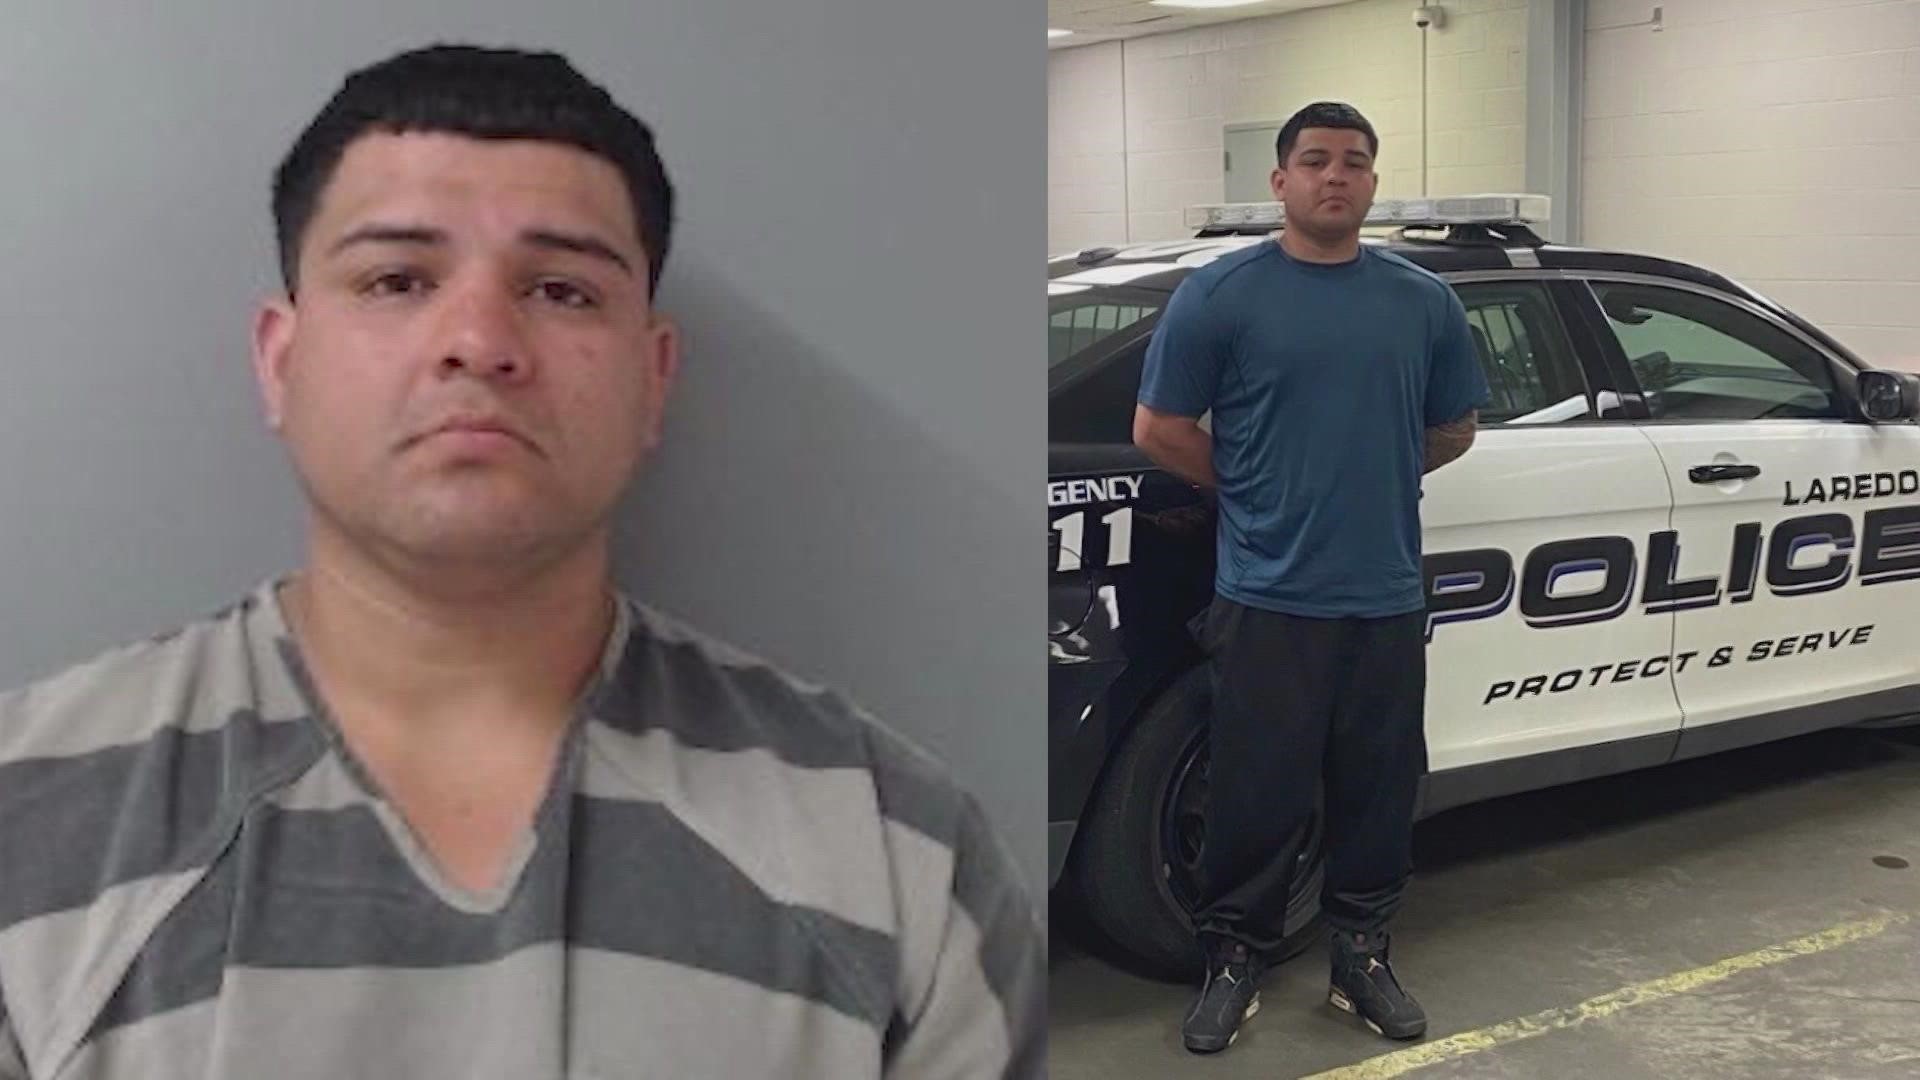 Daniel Chacon was taken into custody in Mexico Wednesday night after his ex-girlfriend, Maira Gutierrez, was found dead in her abandoned SUV in southeast Houston.